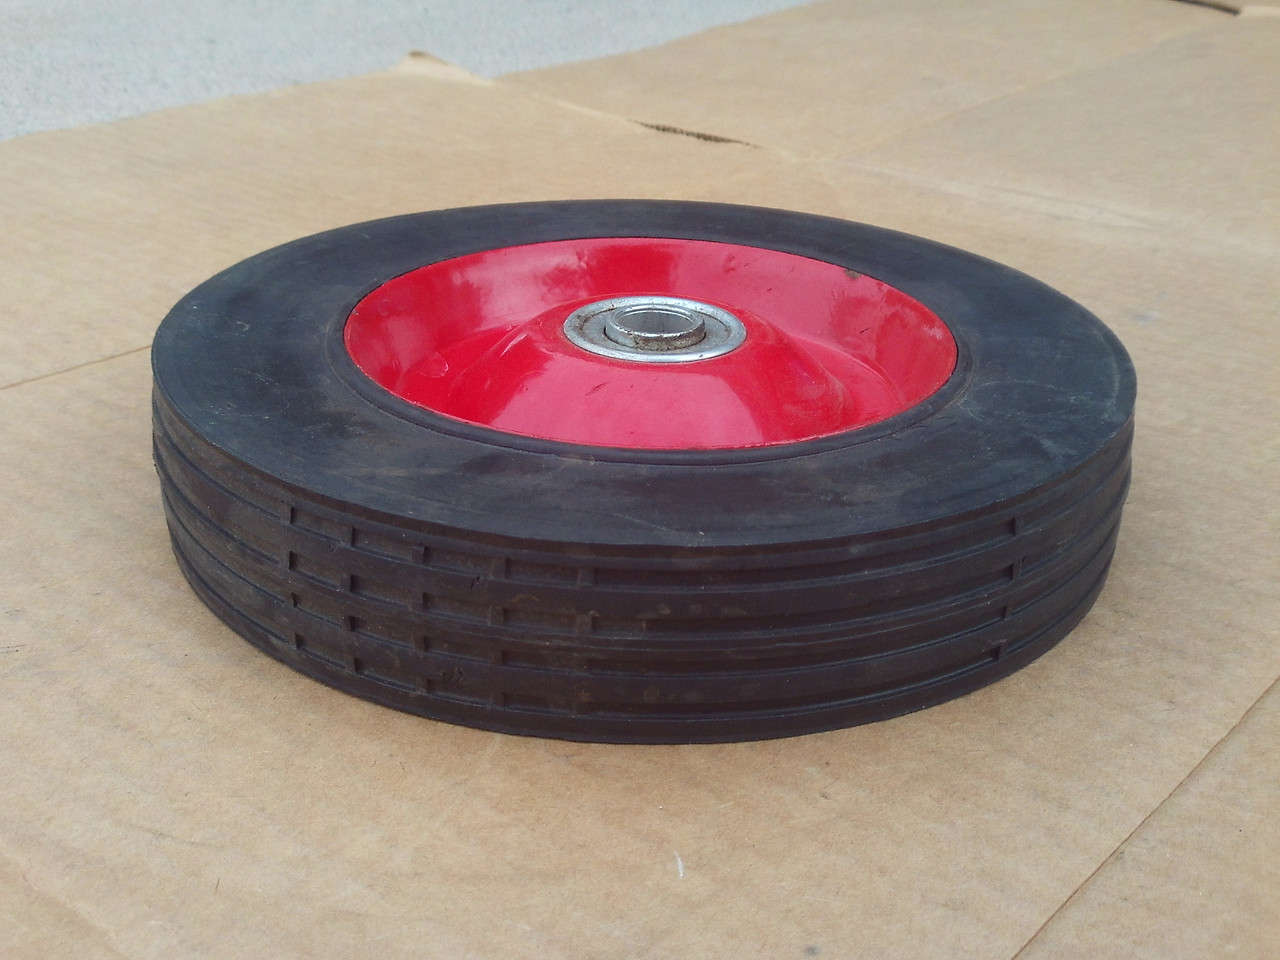 Wheel for Mclane 3093, 8" Tall x 1-1/2" Wide